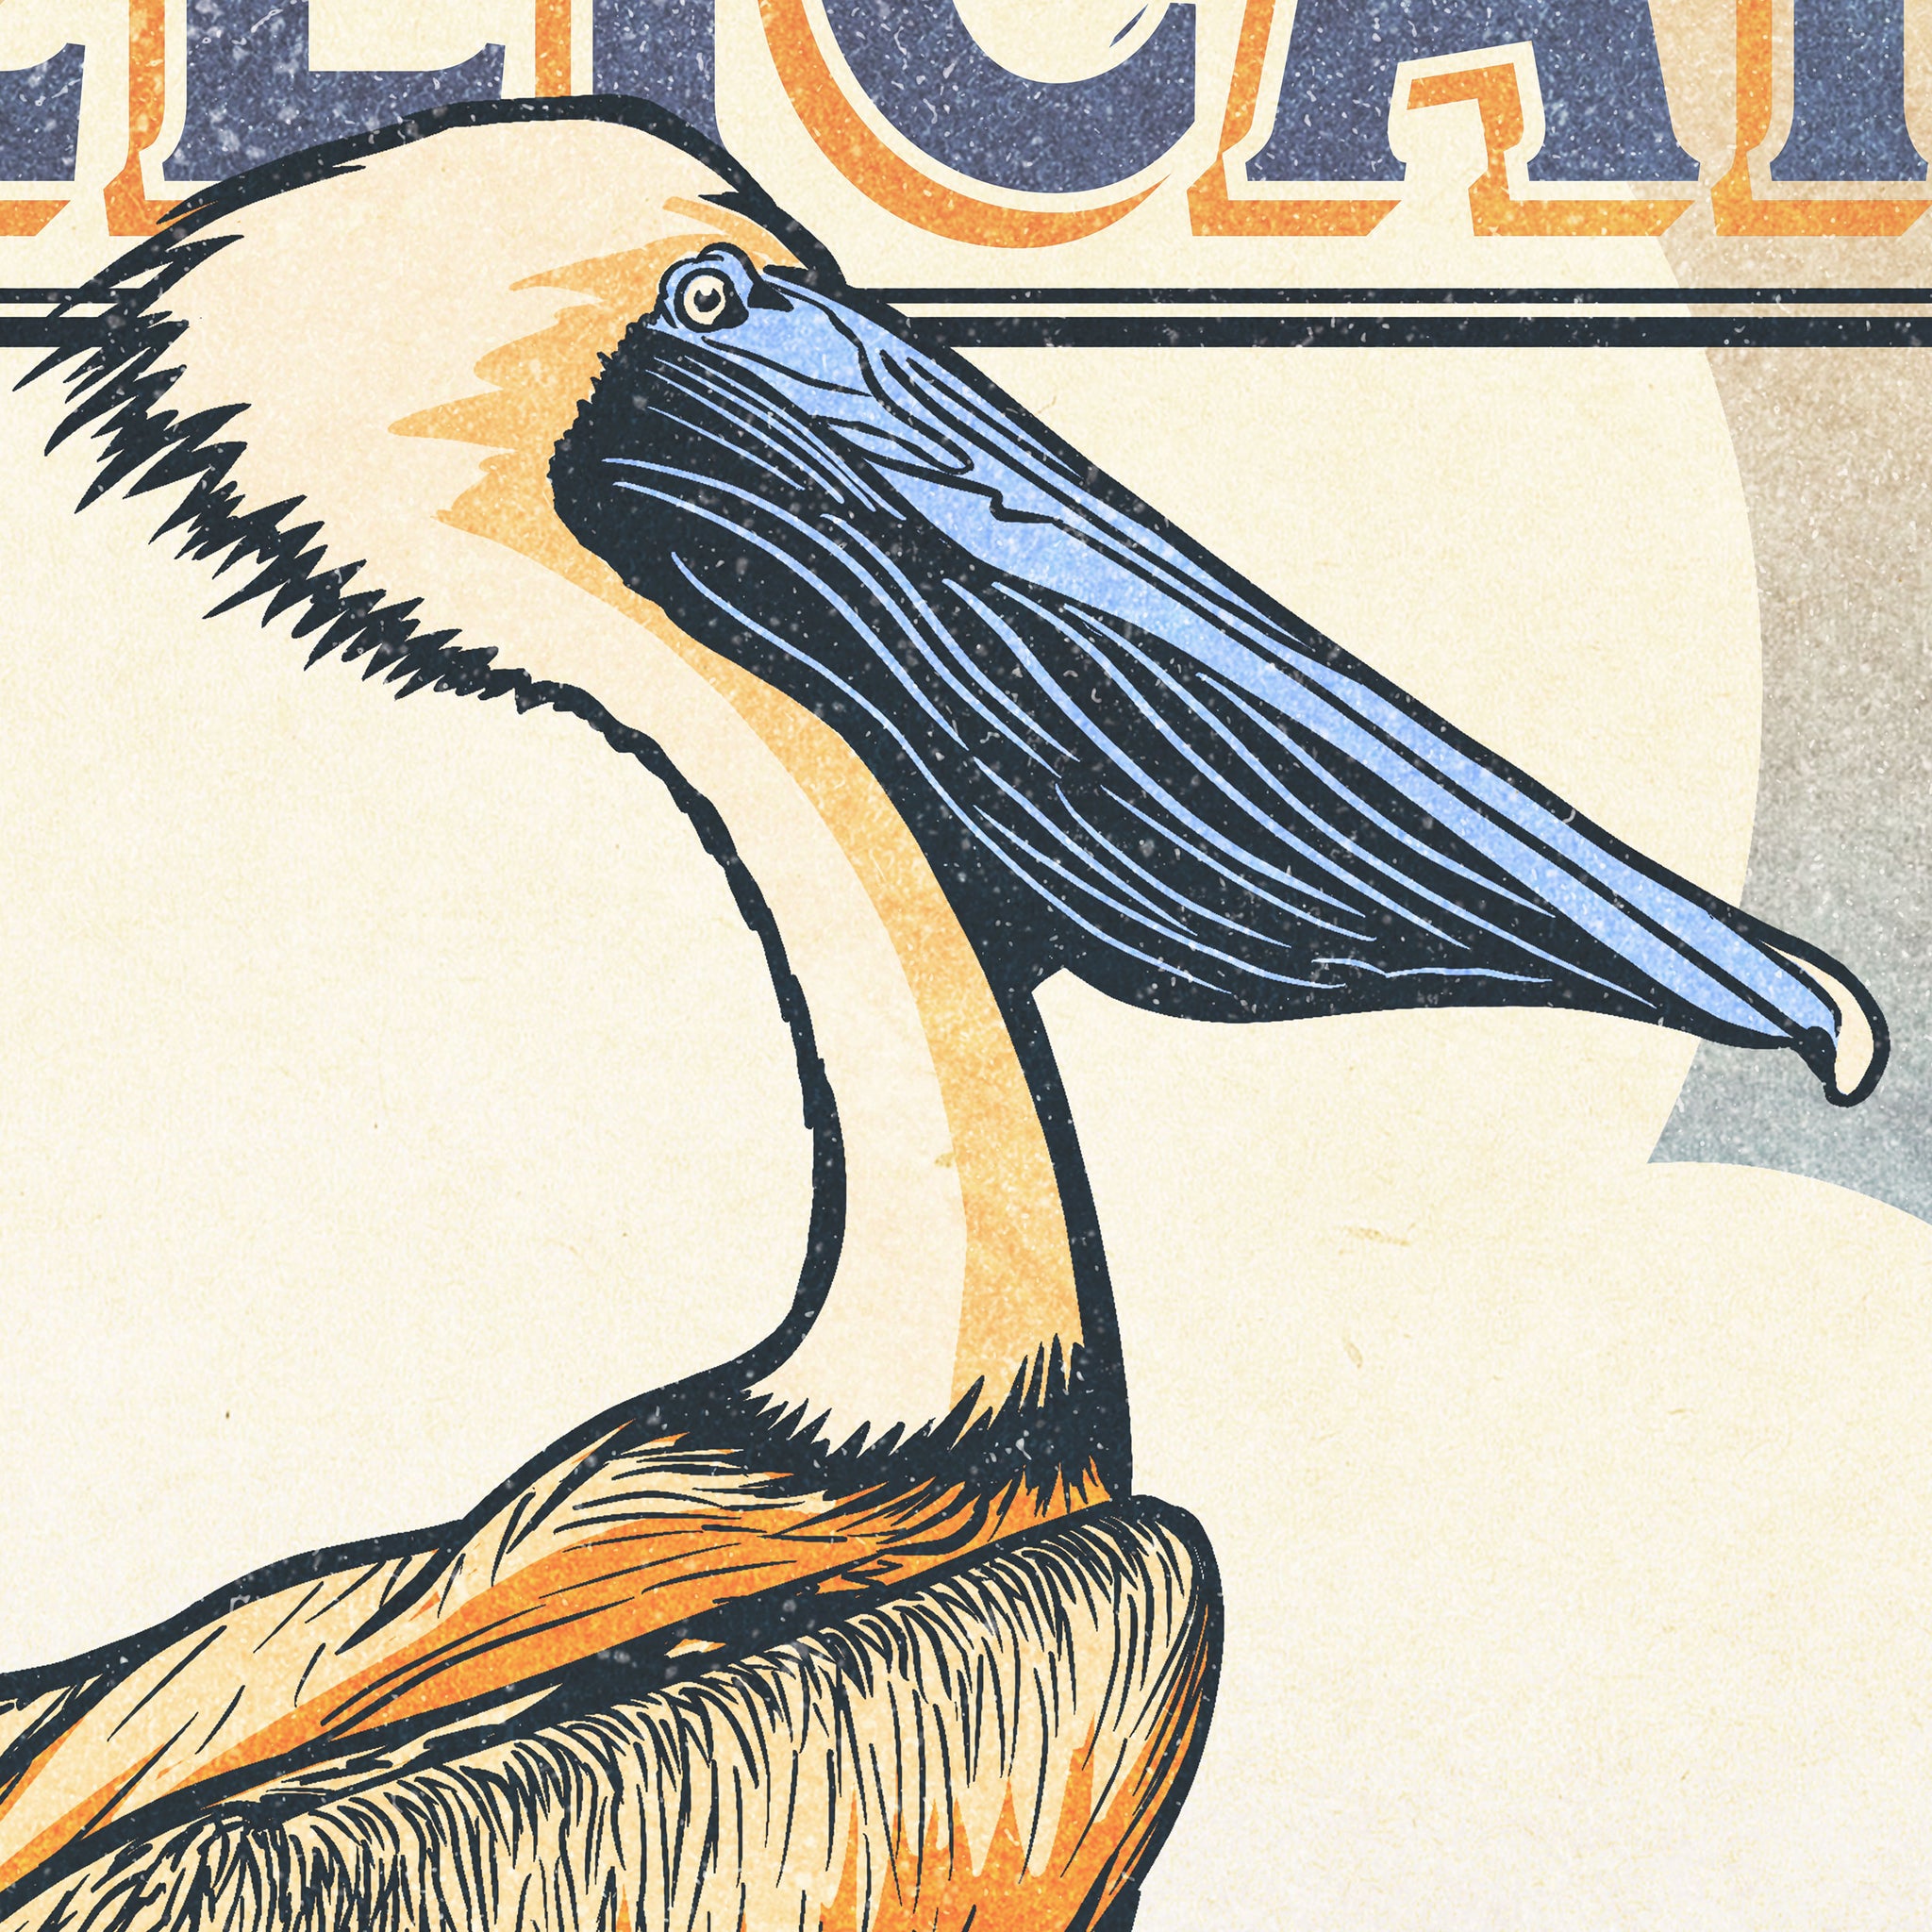 Retro Style Humorous Brown Pelican Poster Giclee Art Print - The